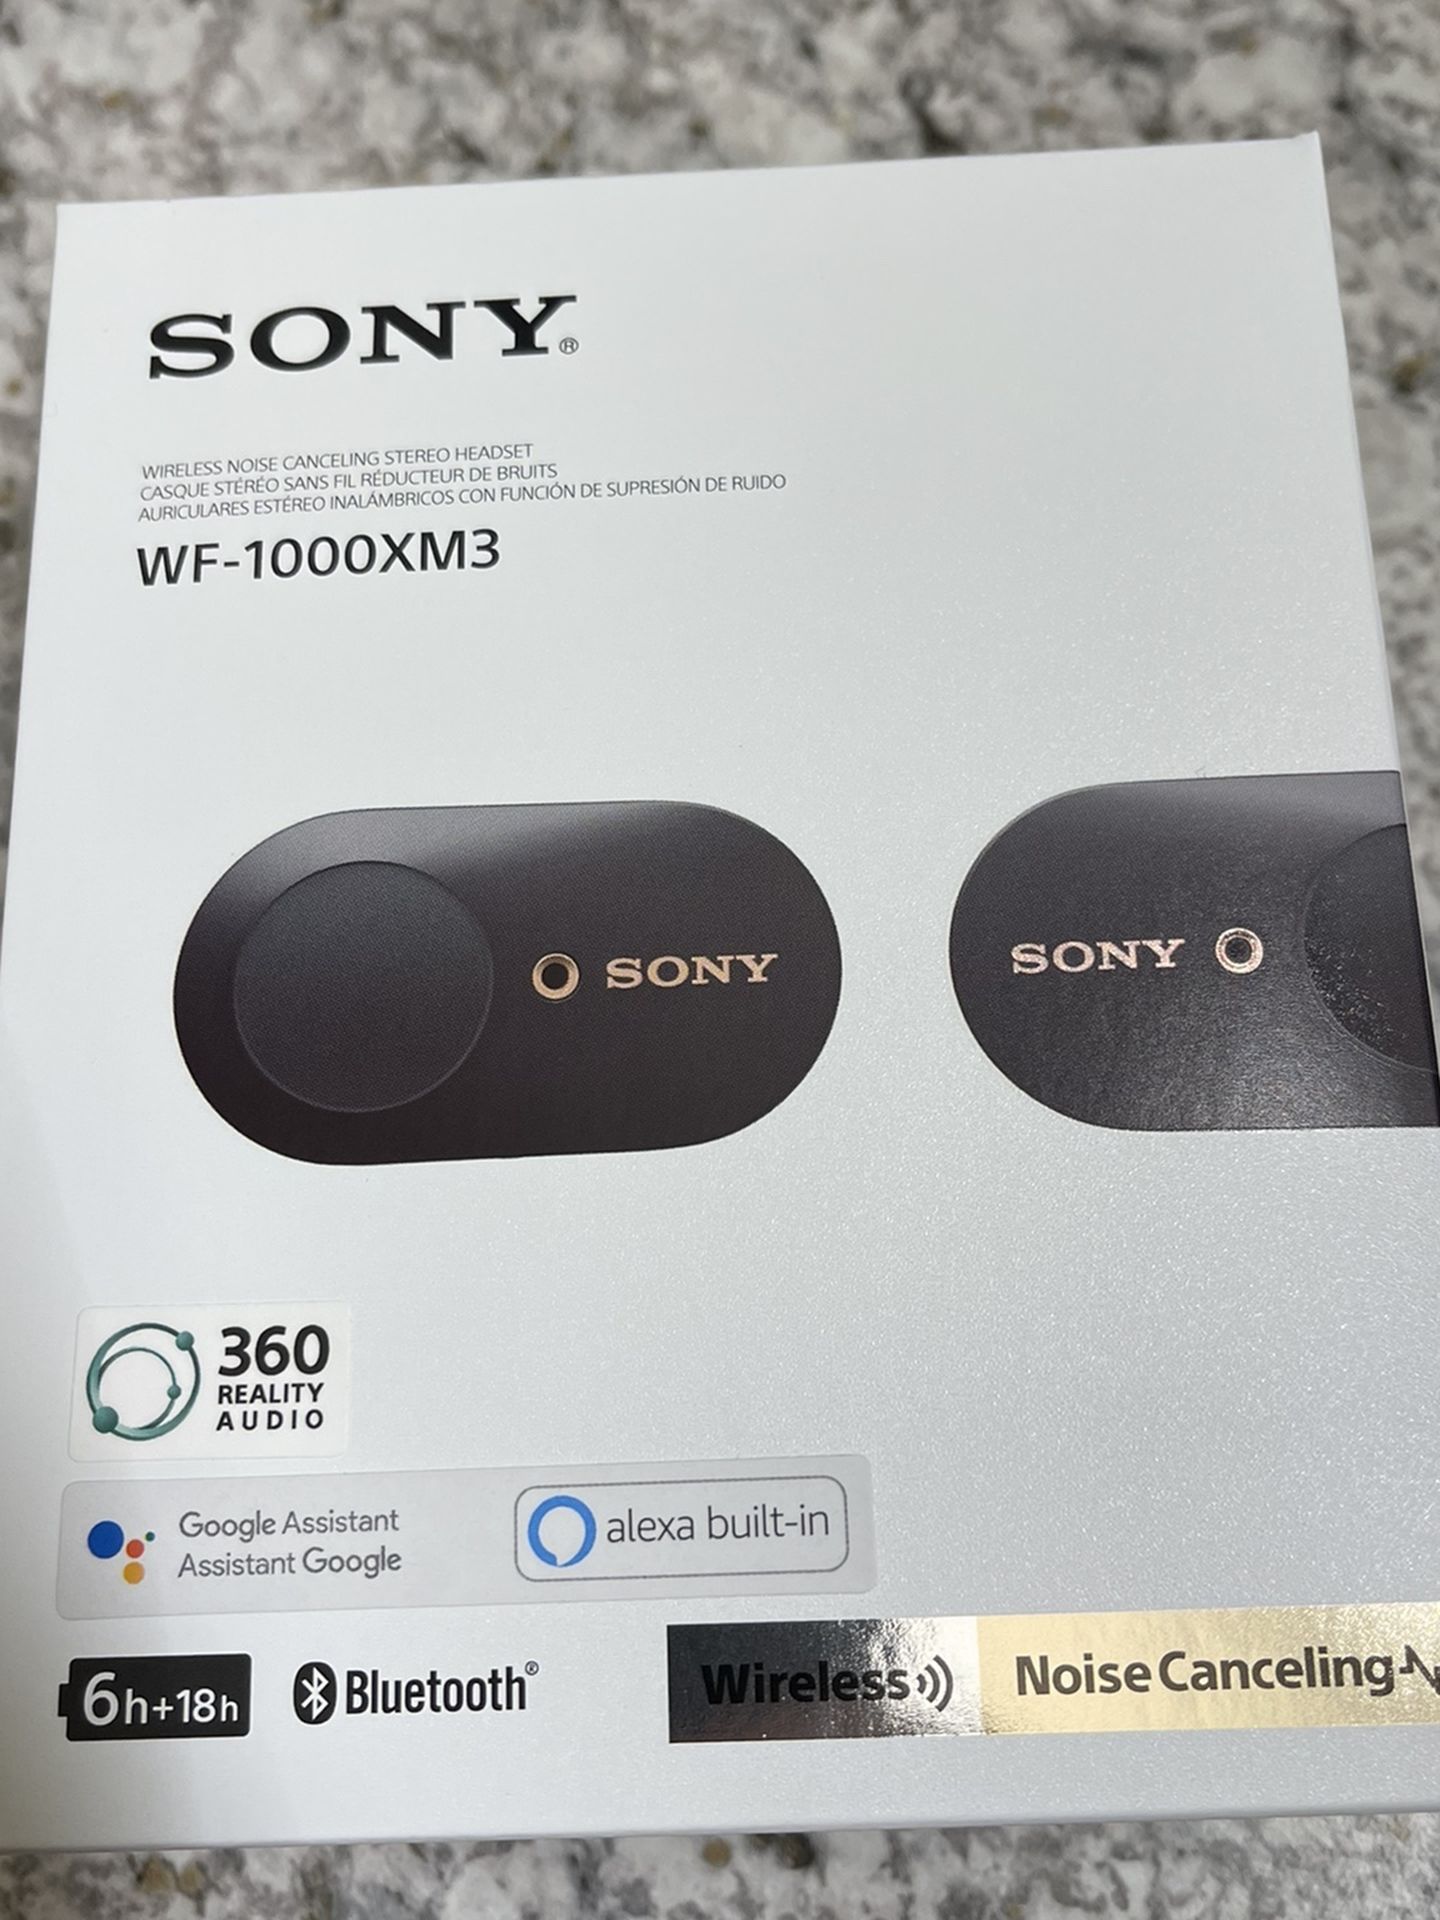 Sony Wf-1000xm3 For TRADE